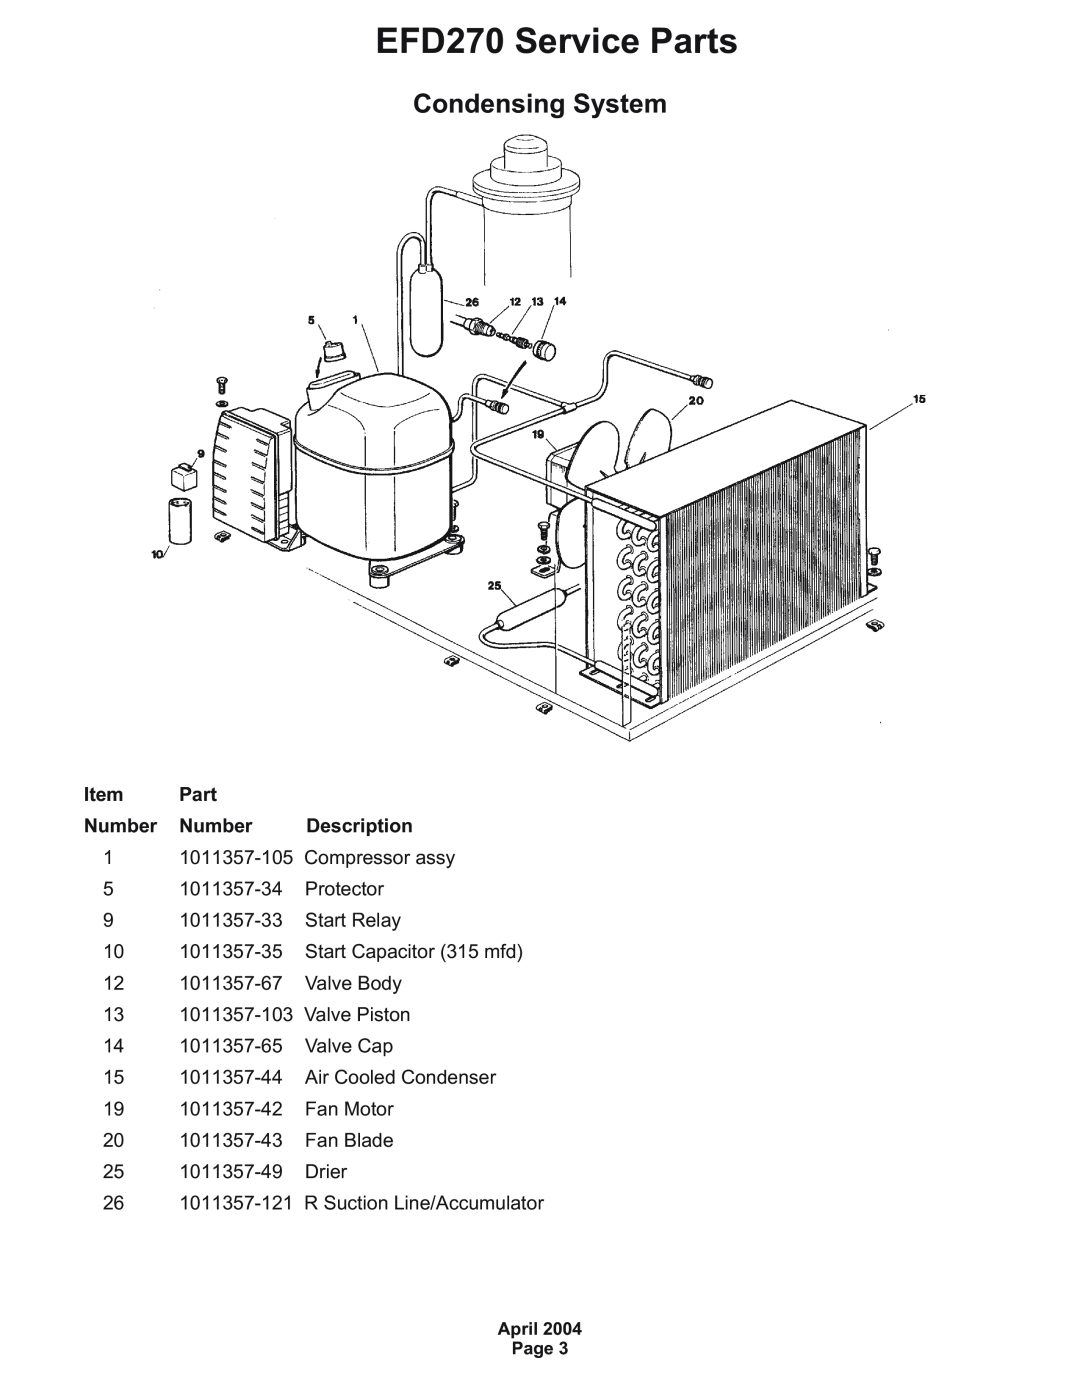 Ice-O-Matic manual Condensing System, Item Part, Number Number, EFD270 Service Parts 